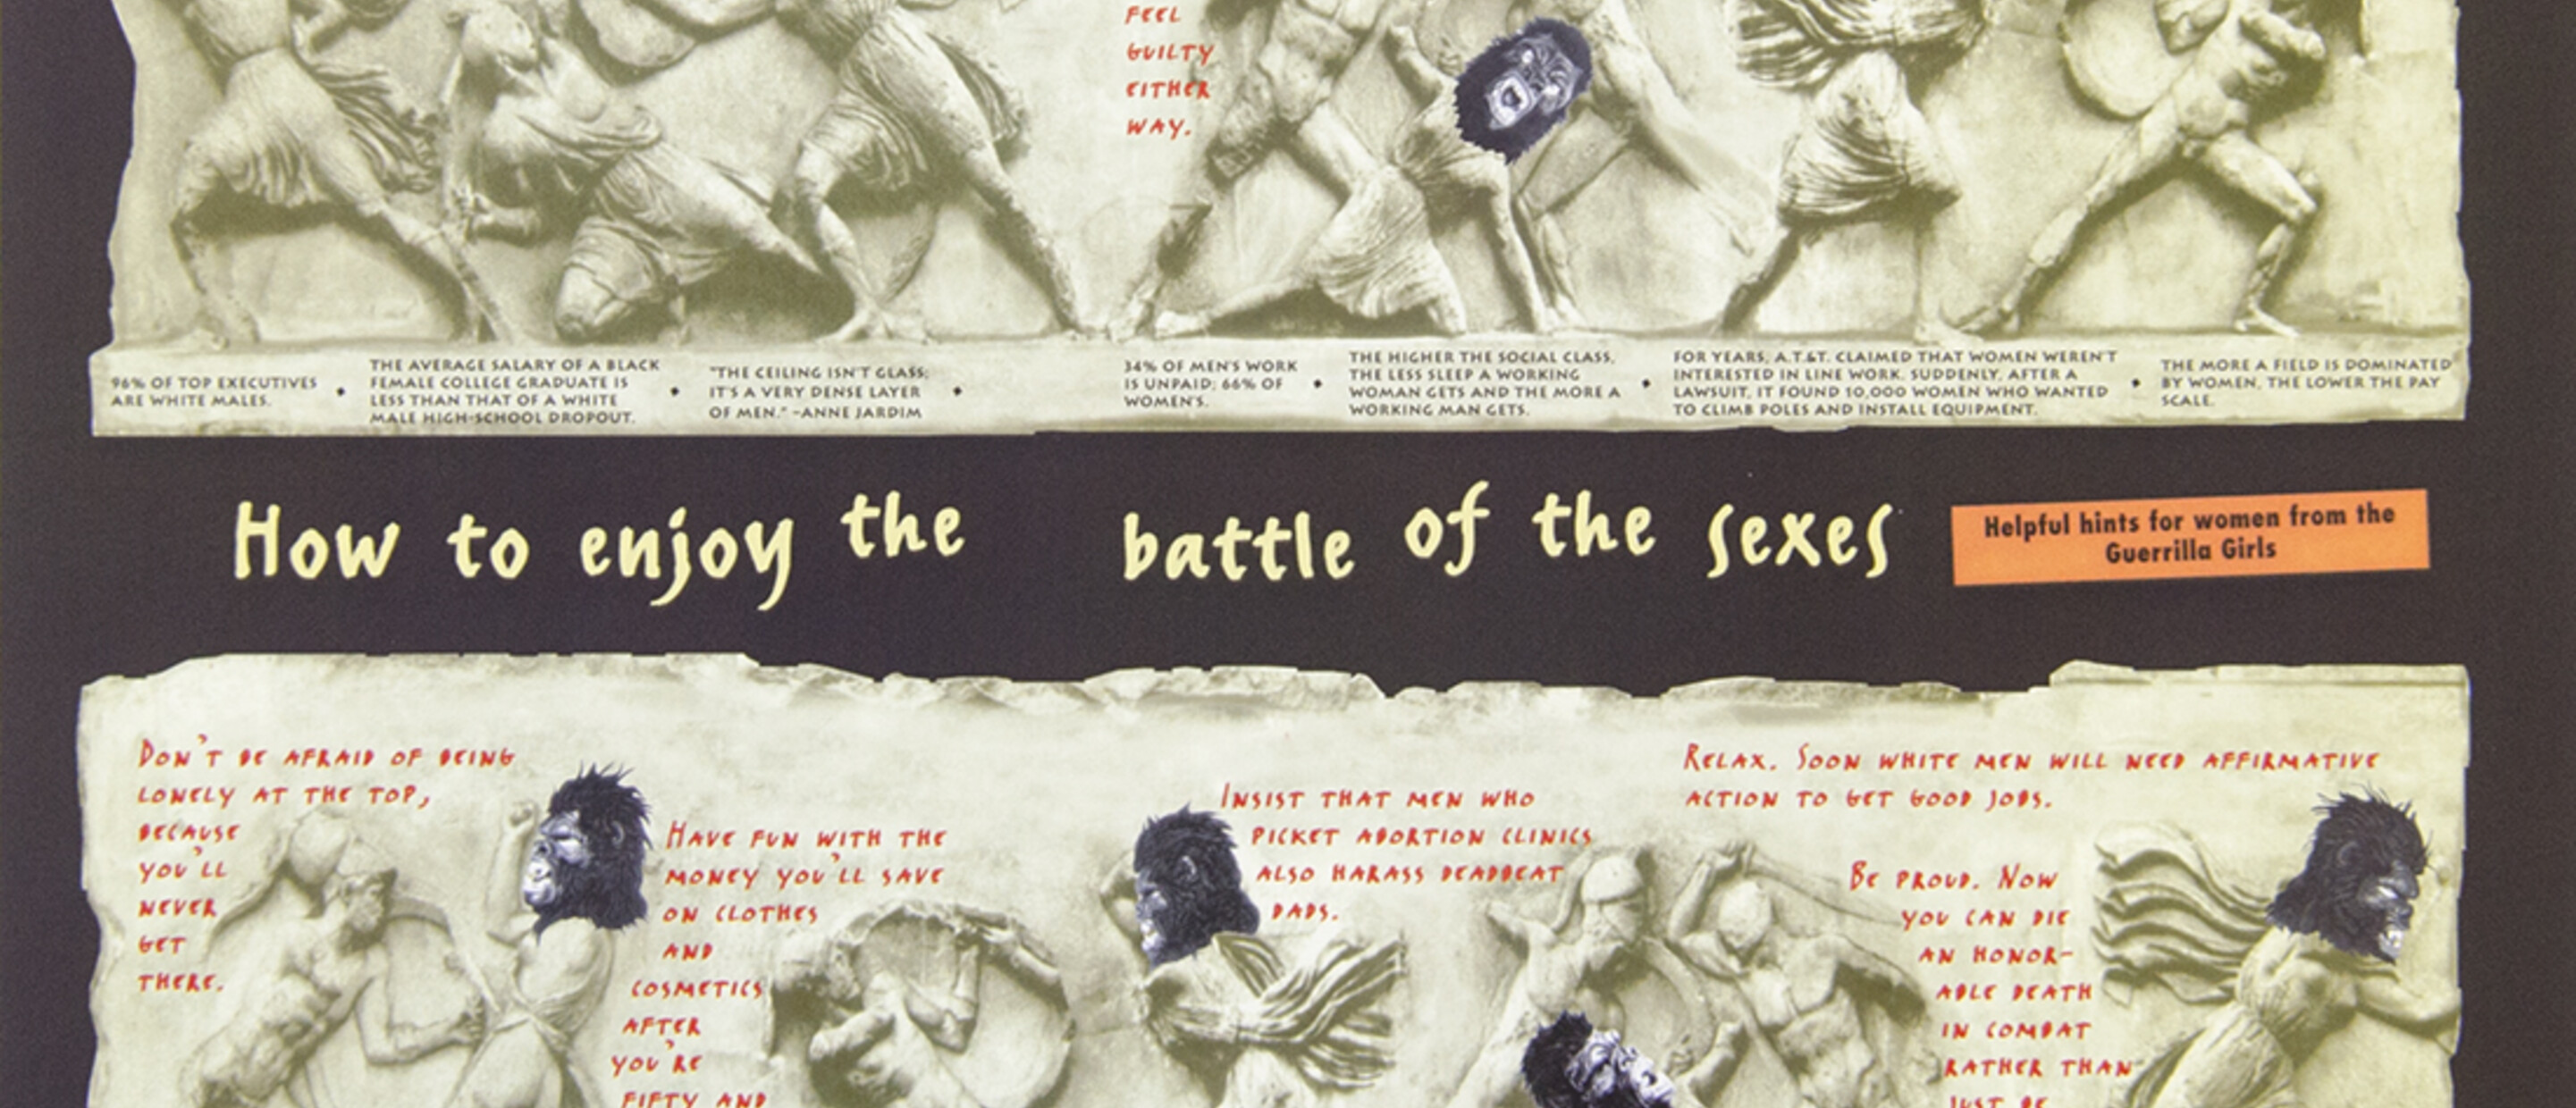 Guerrilla Girls, Battle Of The Sexes, project for the New Yorker, 1996, 12 x 18 in. Pomona College Collection. Museum purchase with funds provided by the Estate of Walter and Elise Mosher.